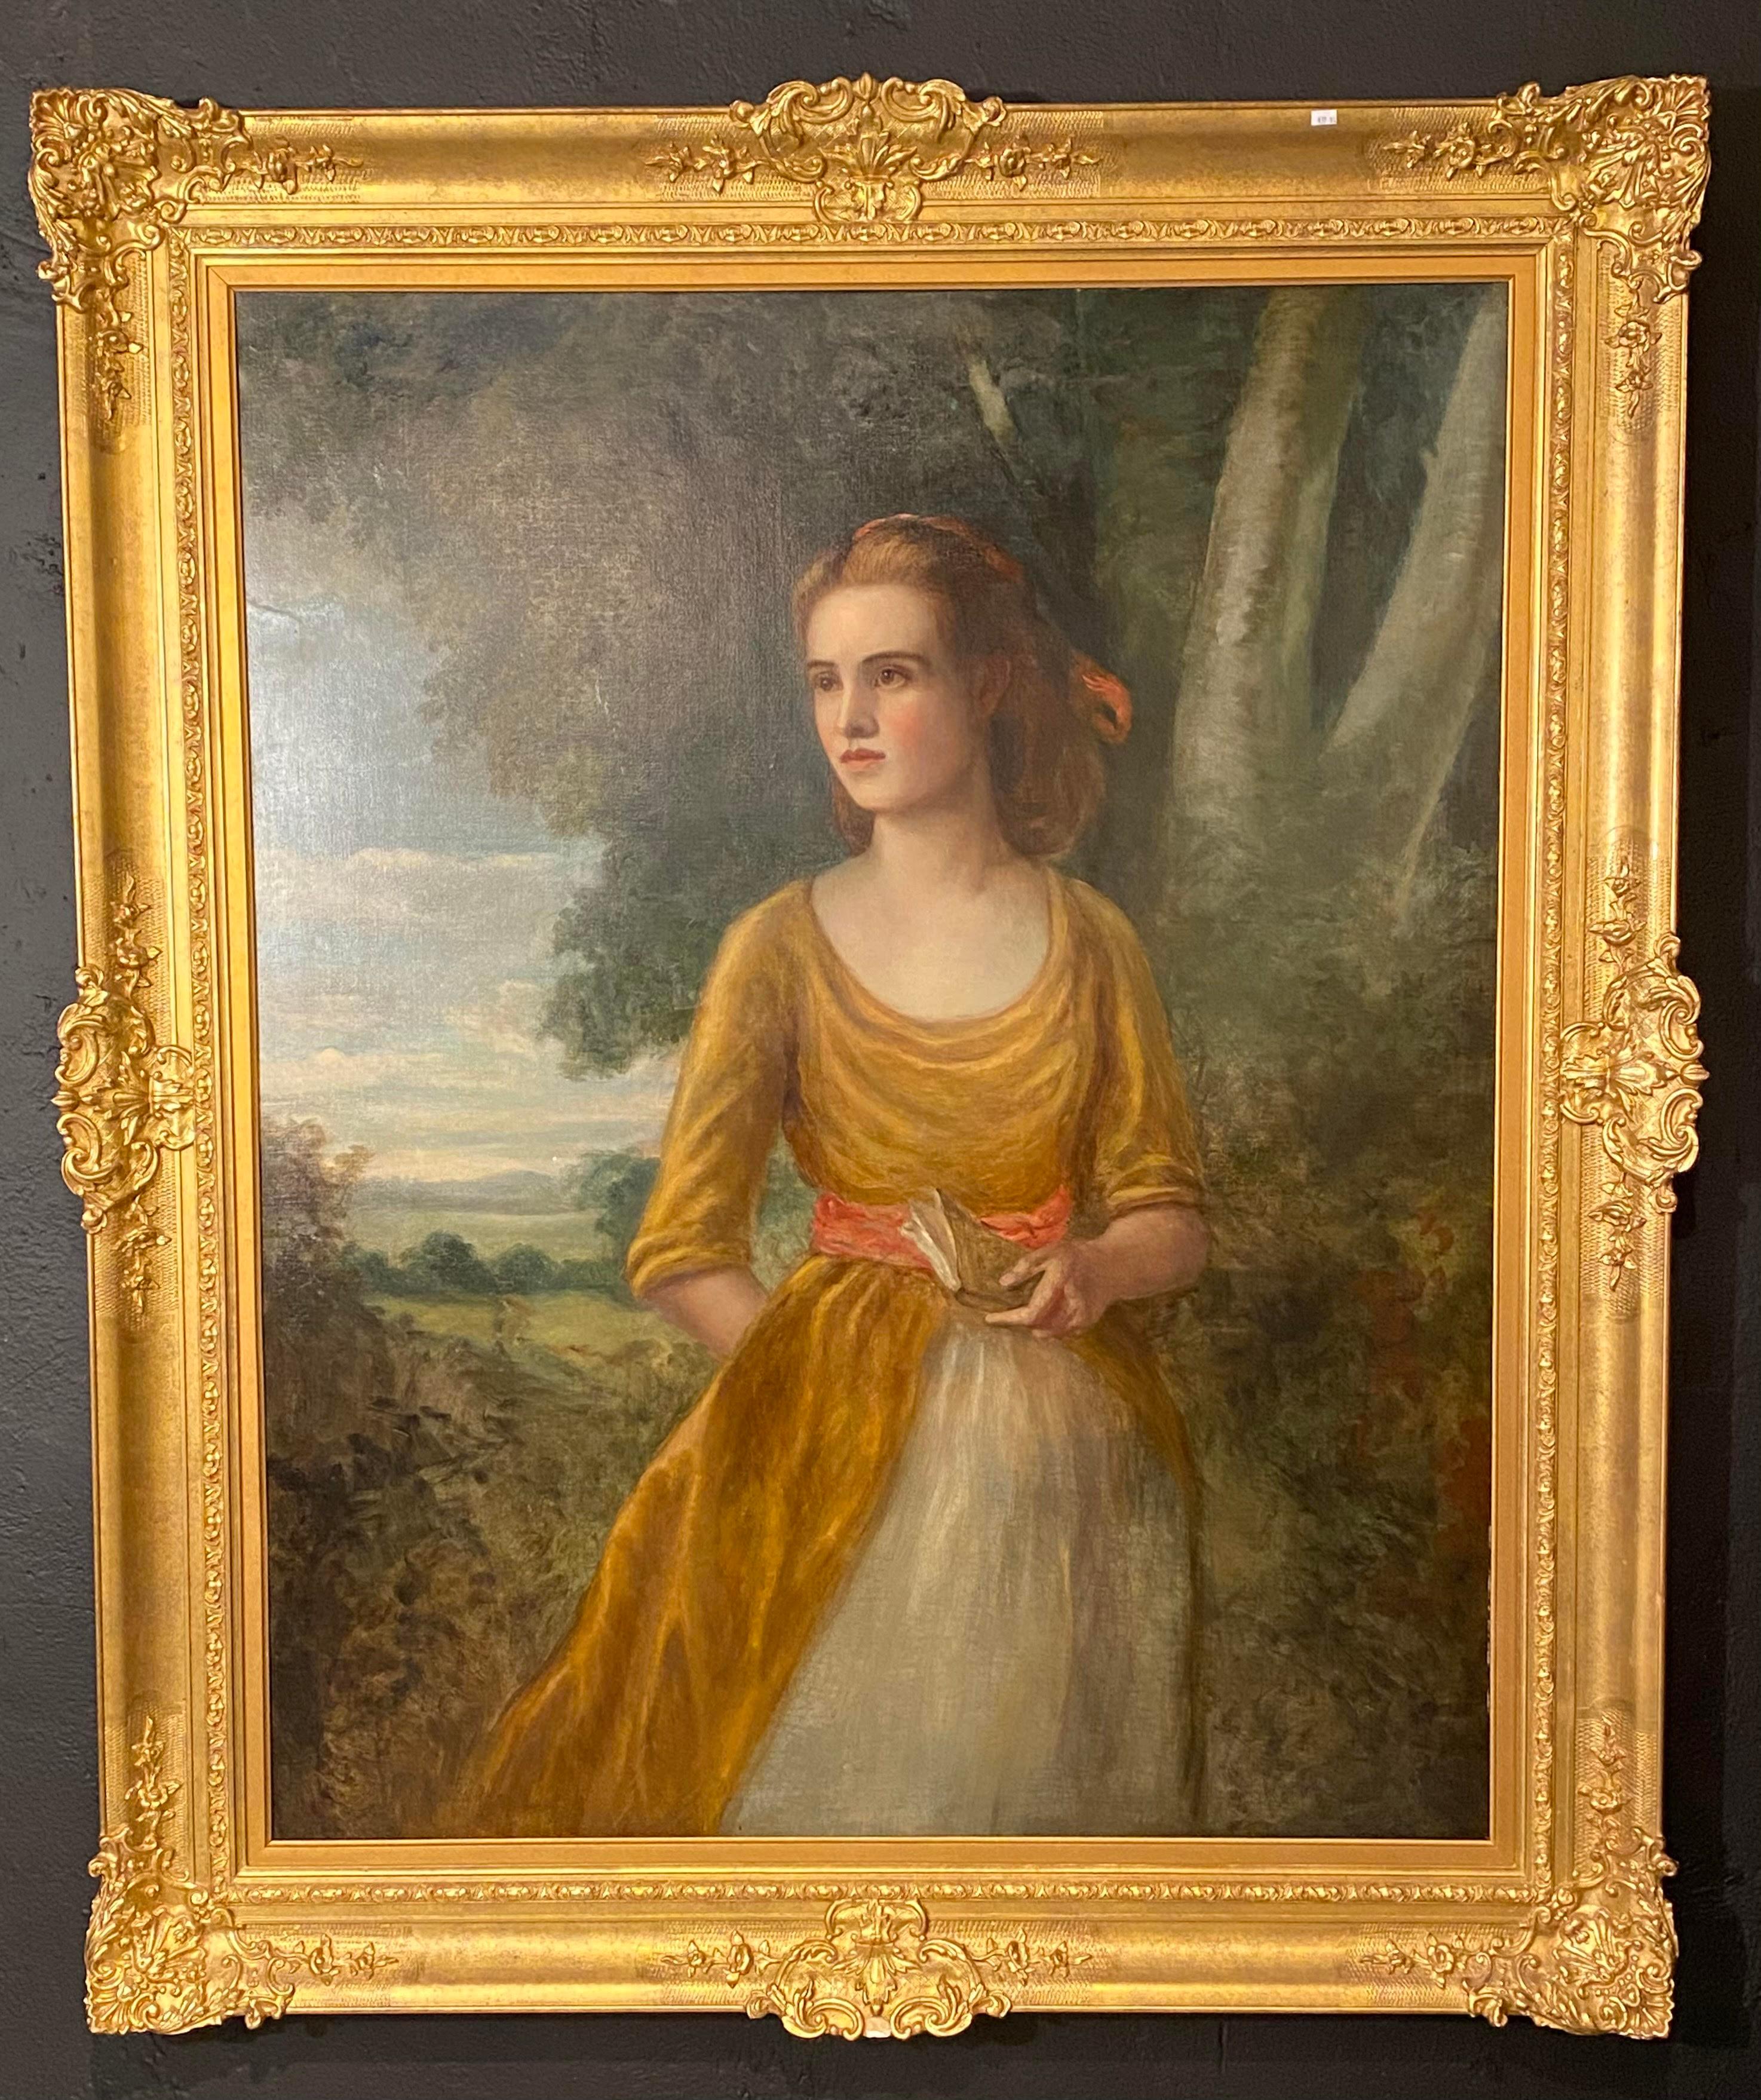 19th century Palatial oil on canvas of a young beauty. This large and impressive oil on canvas has a young woman in proper attire walking through the forest. The whole set in a finely carved gilt gesso frame. Unframed 40